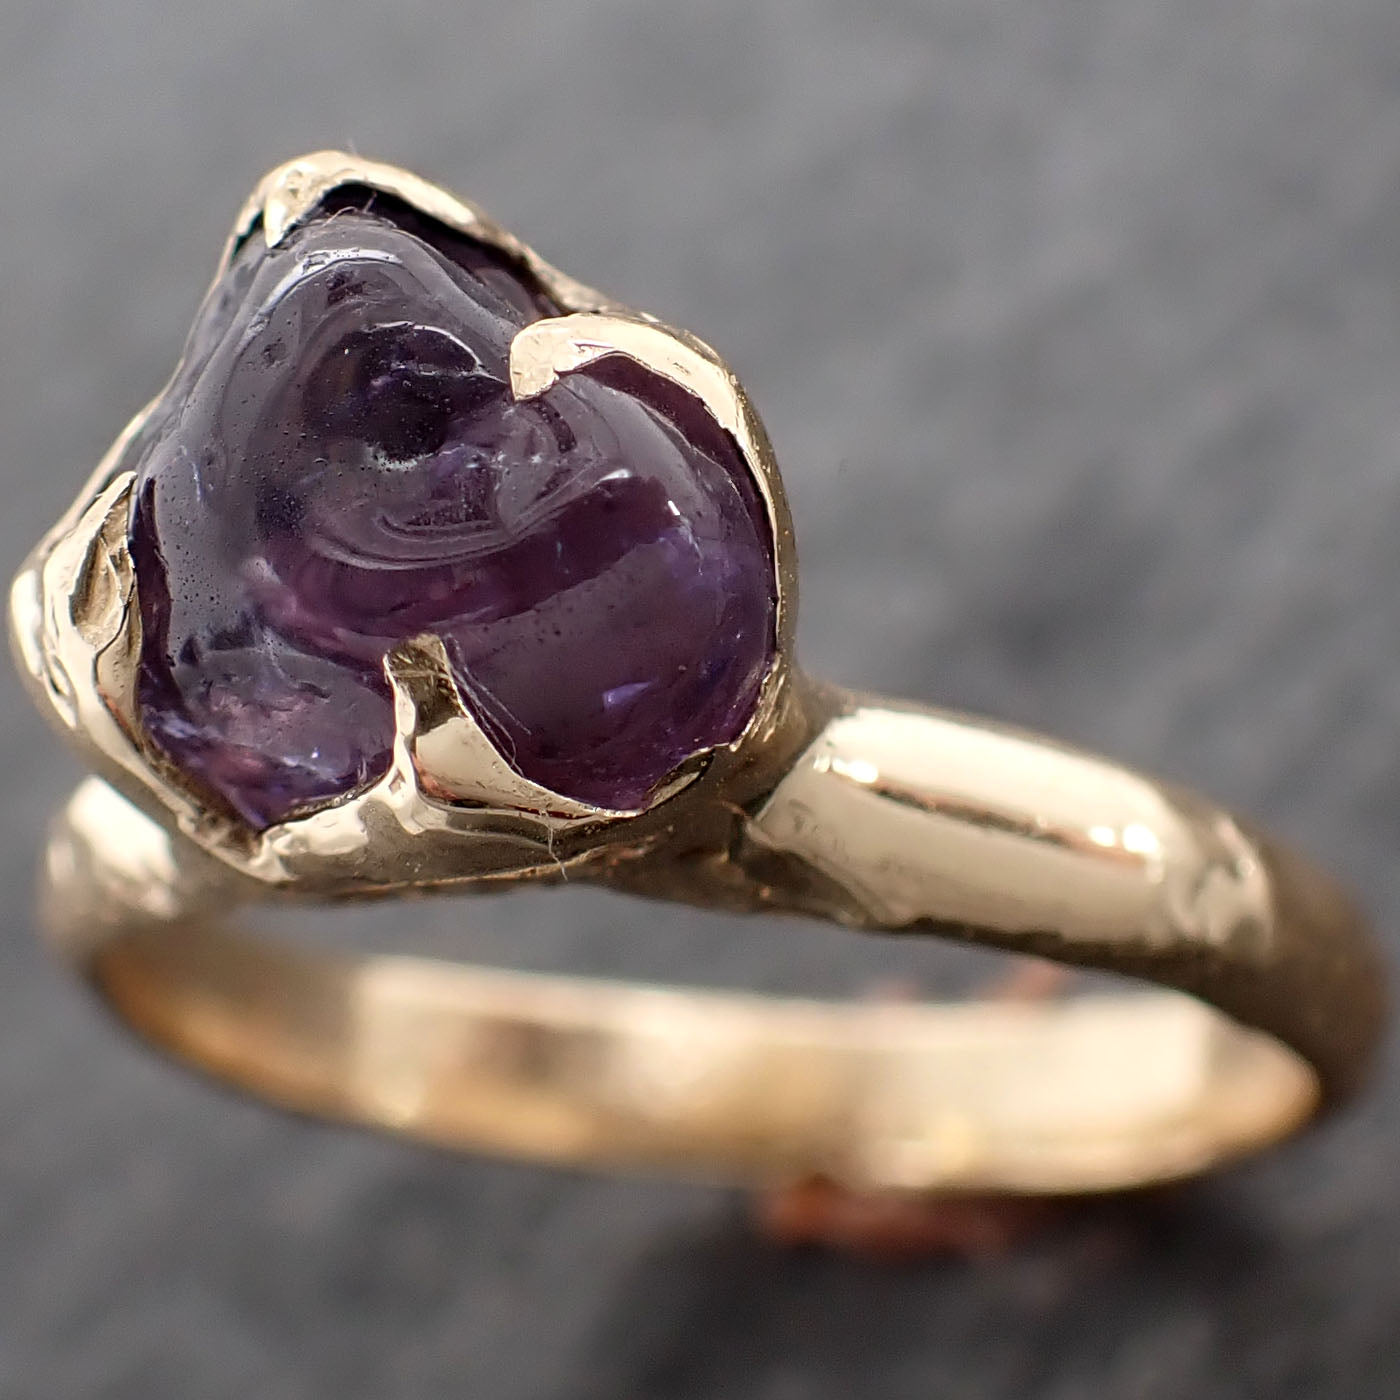 sapphire pebble candy polished yellow 18k gold solitaire and band set gemstone ring 2639 Alternative Engagement